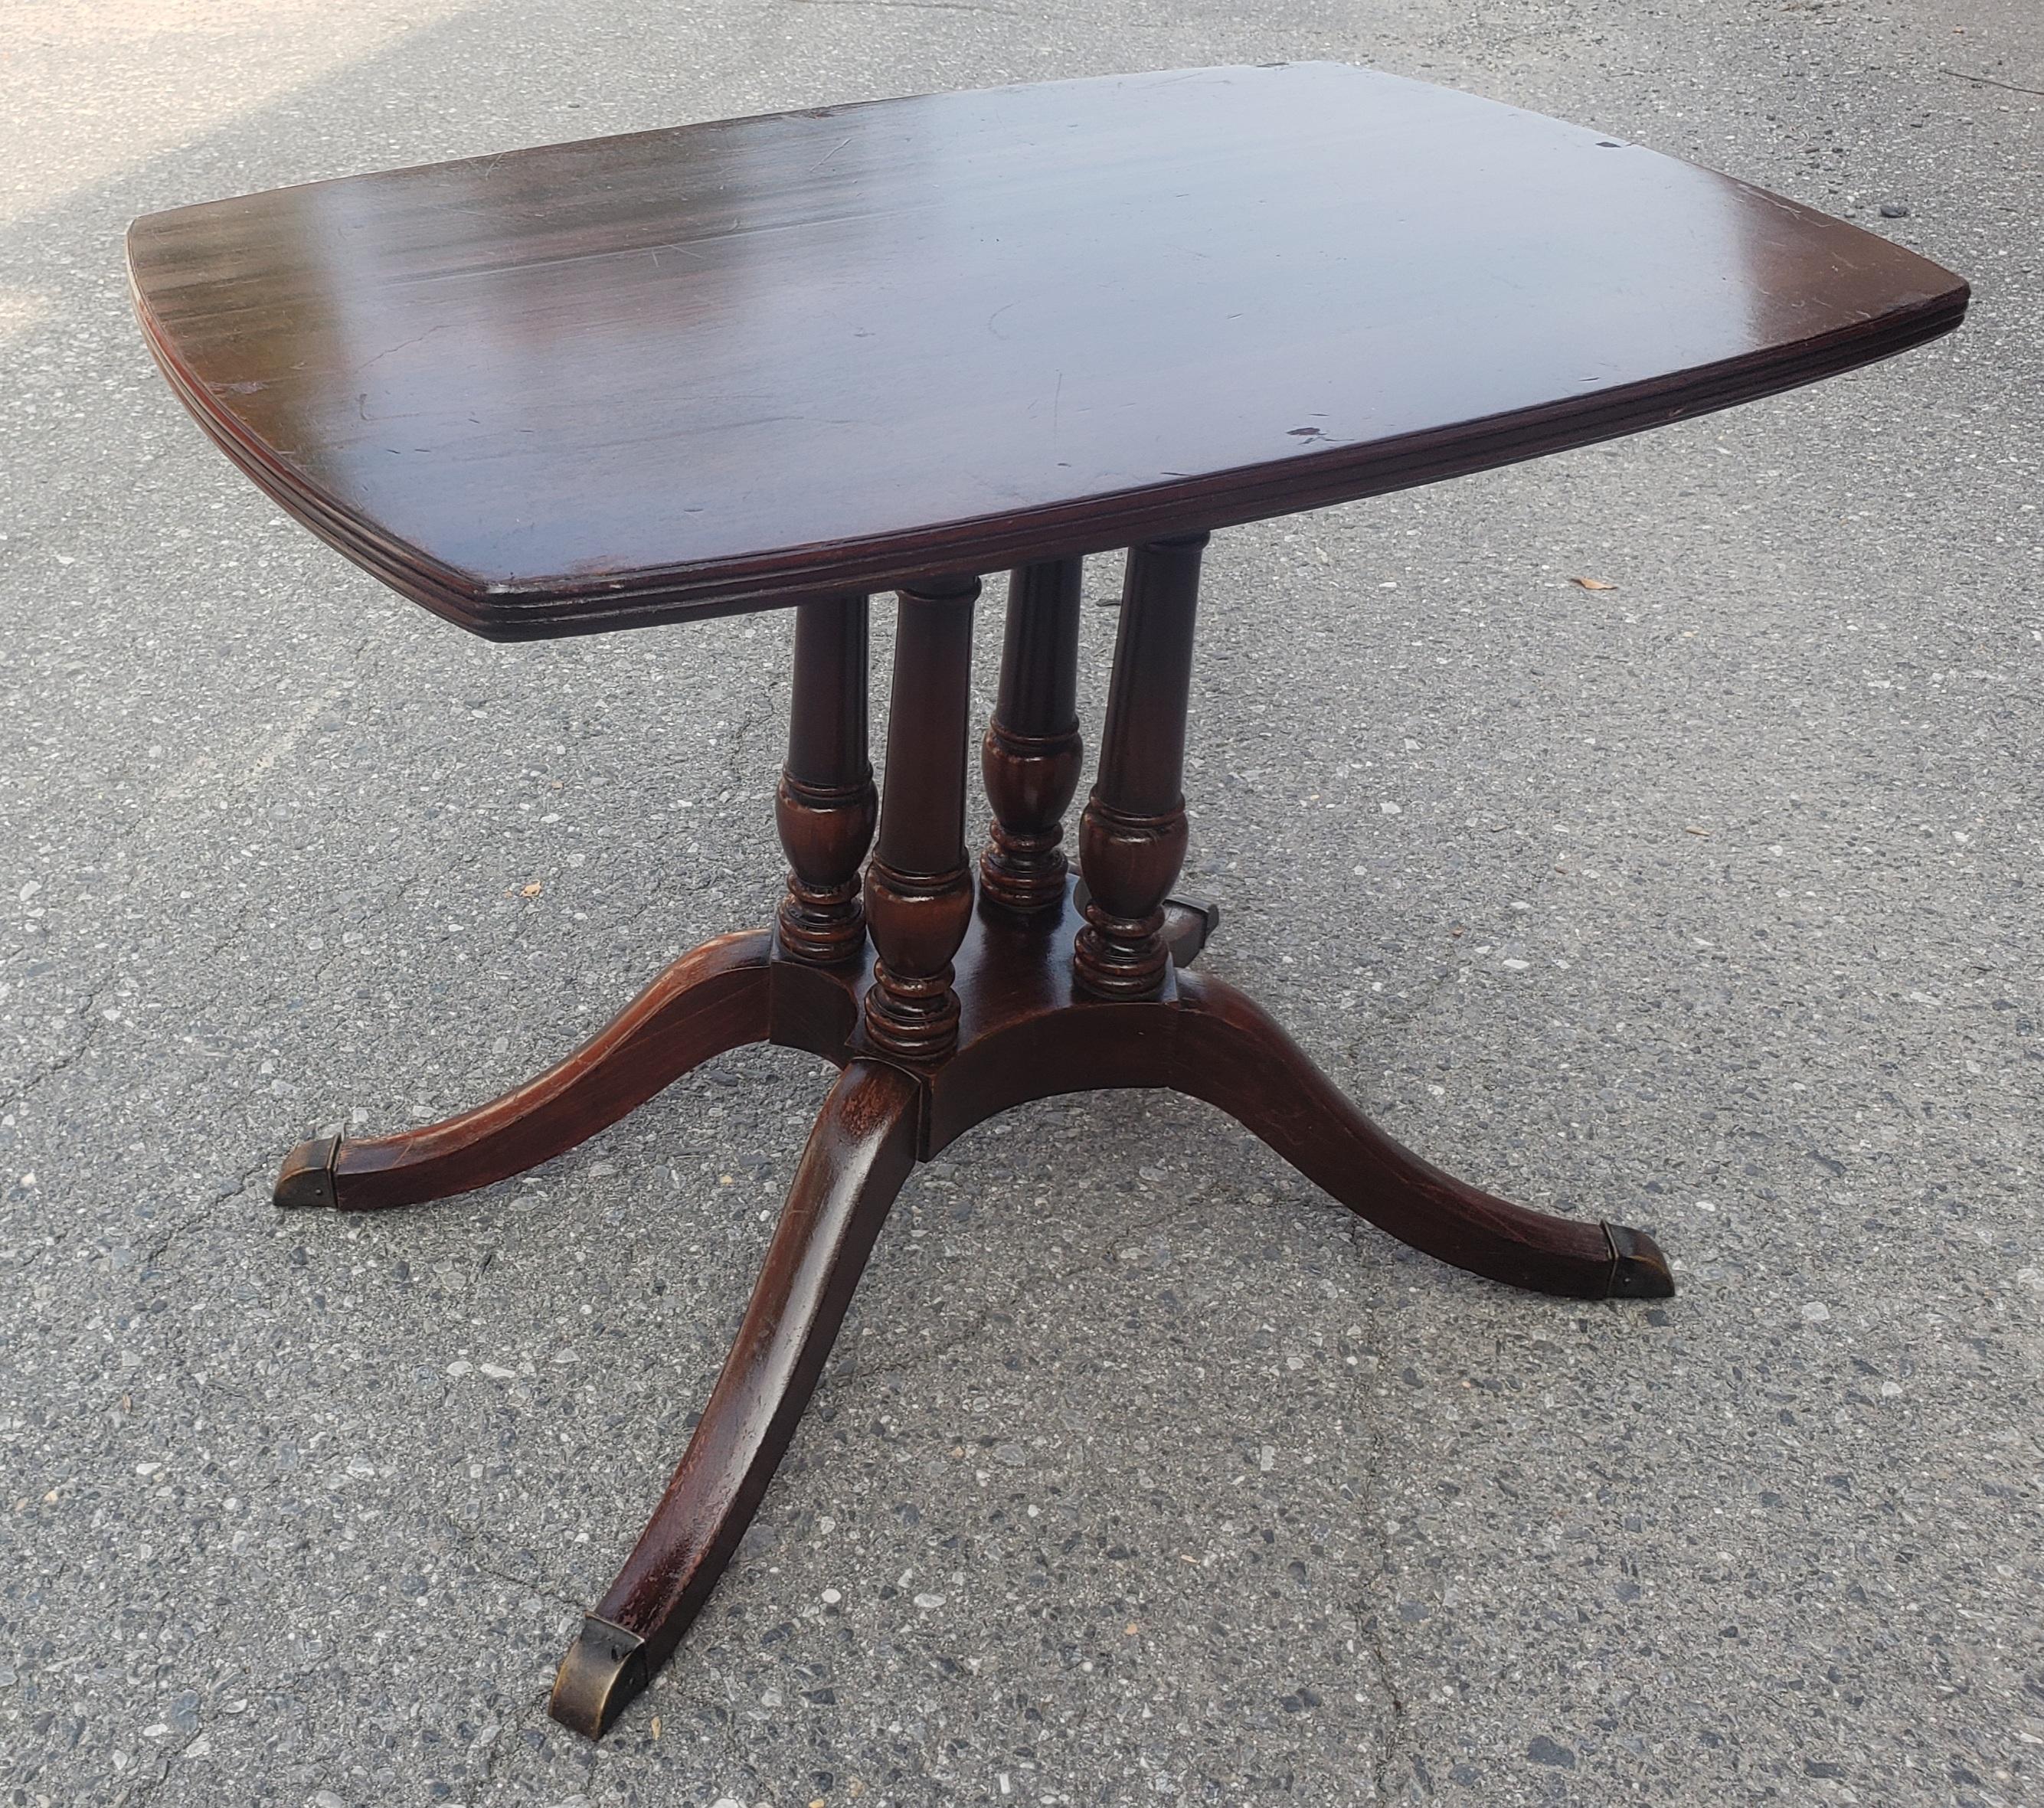 George III 1940s Brandt Furniture Mahogany Side Table with Glass Tray For Sale